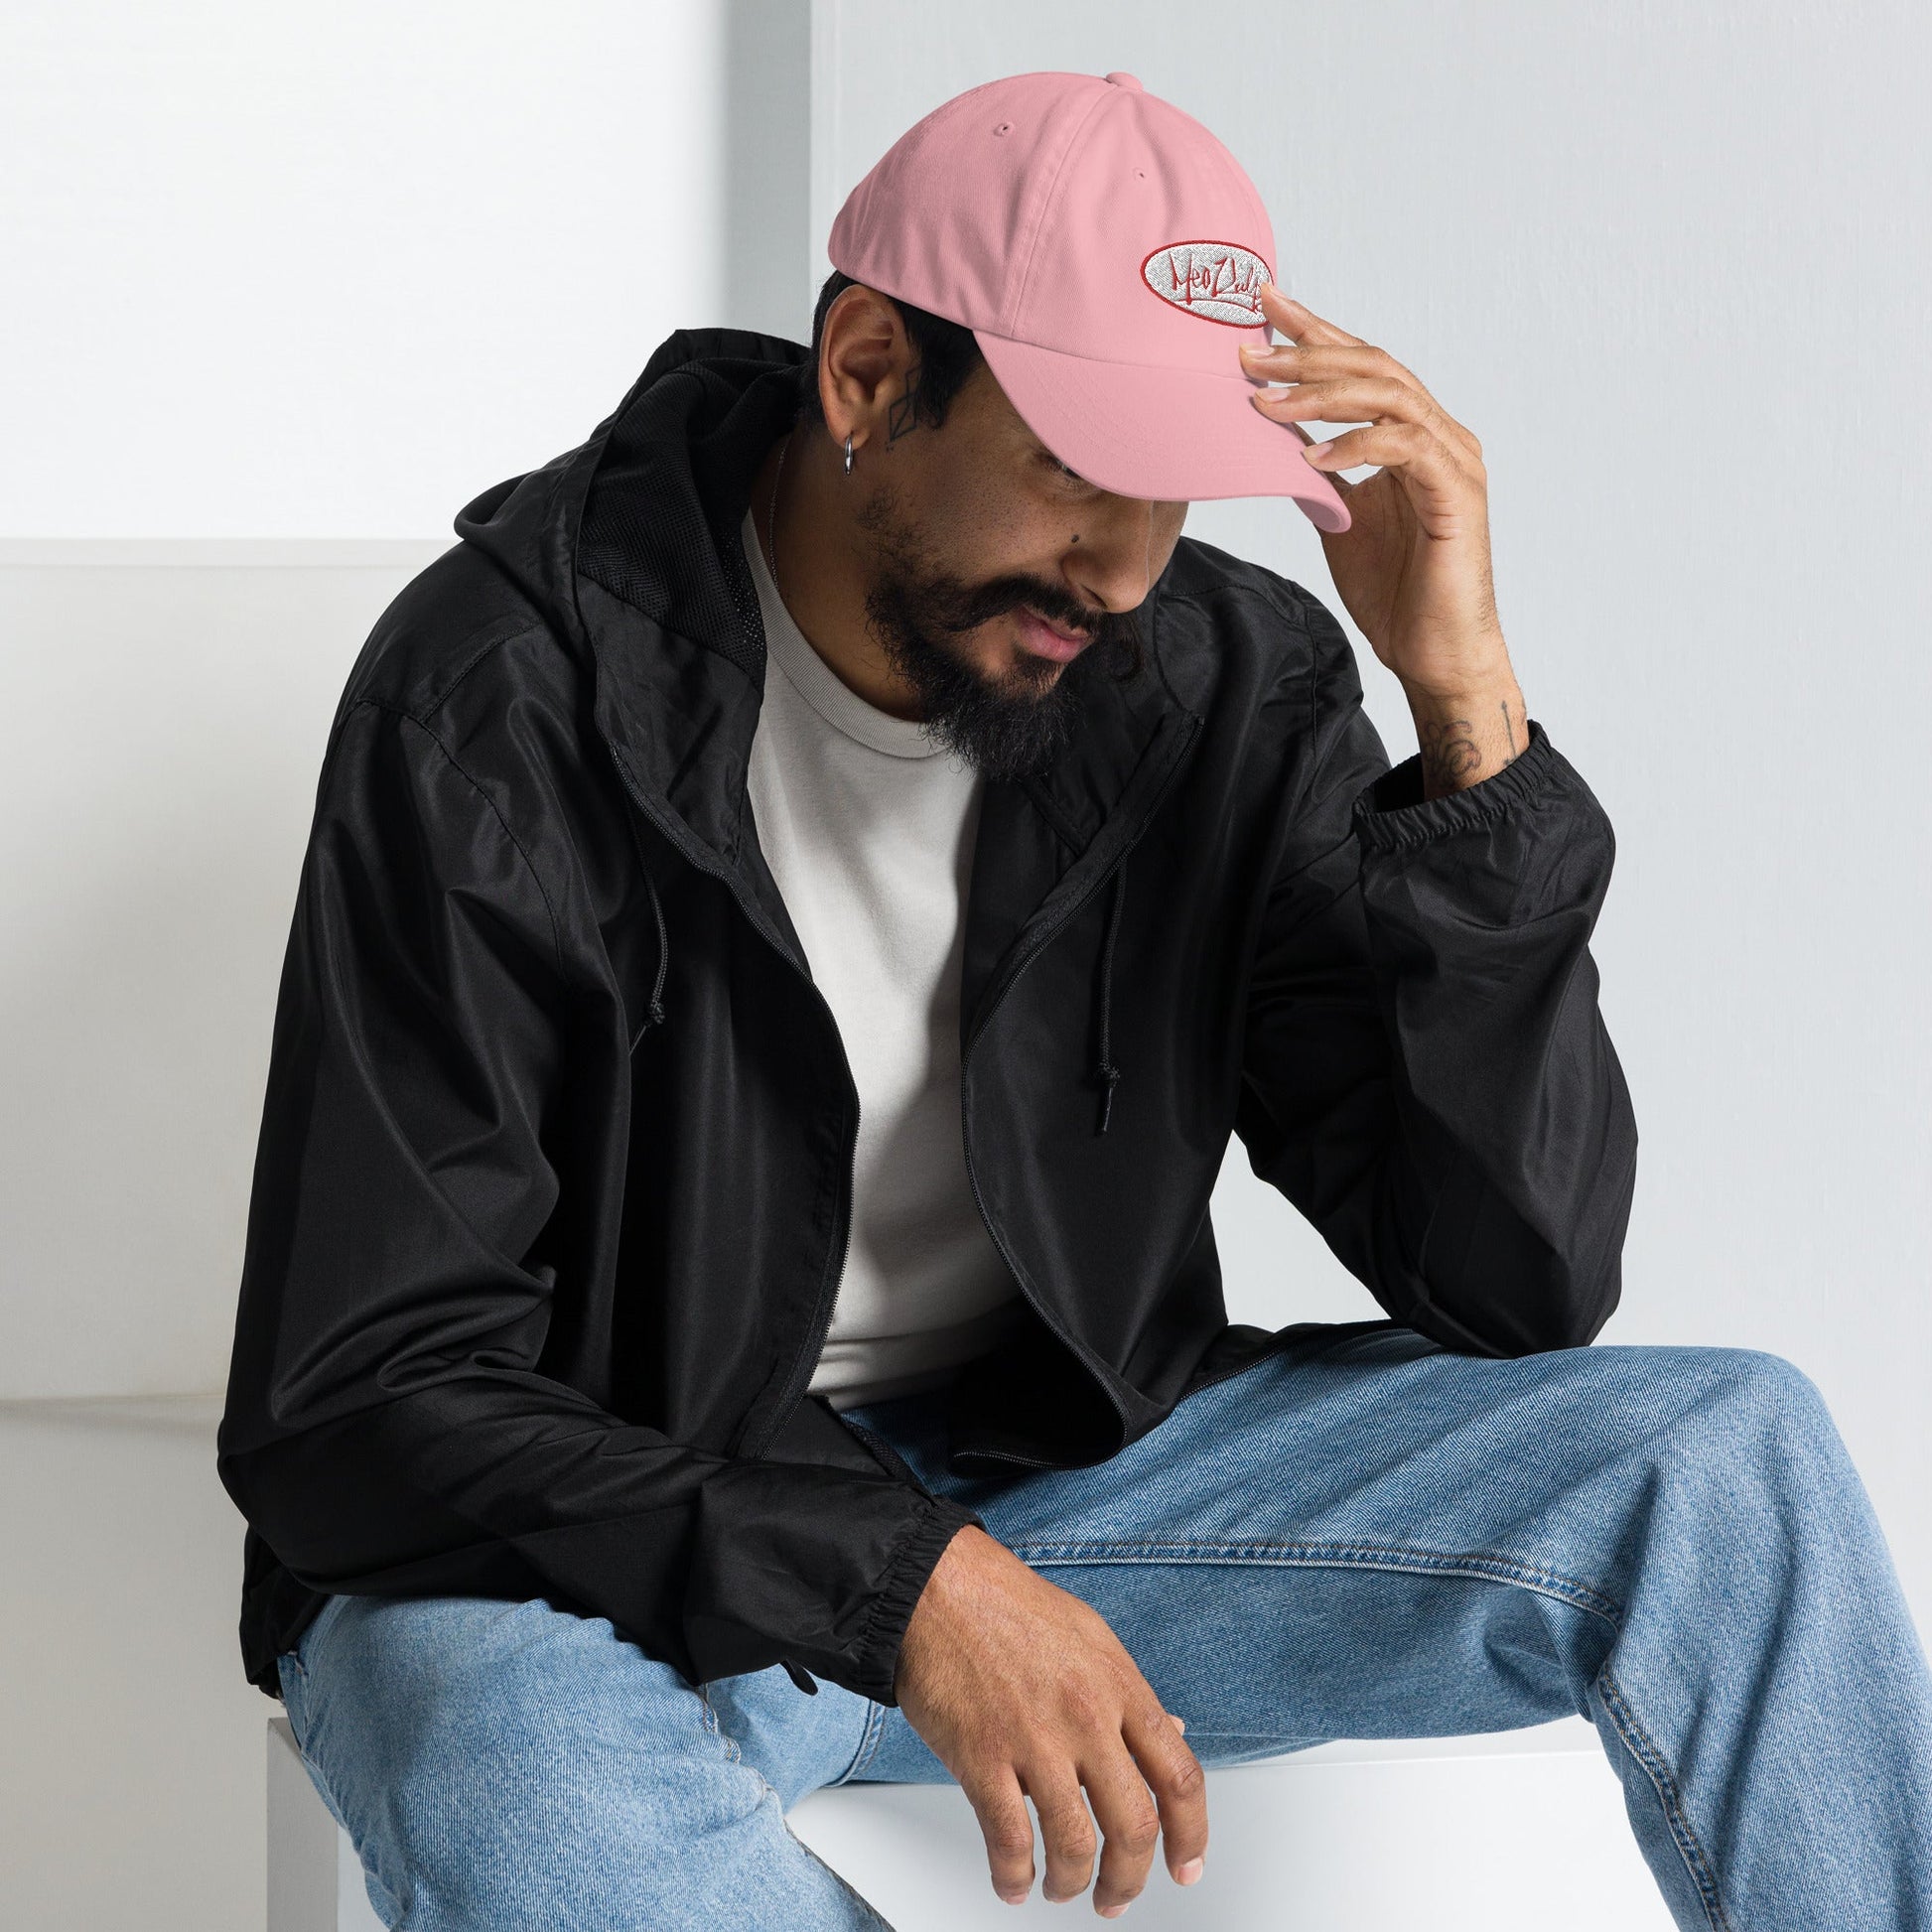 Chill vibes with a side of style. Meet our guy rocking the MeaKulpa Pink Hat, featuring the iconic OG Logo. Sitting comfortably, he effortlessly brings together urban coolness and a laid-back demeanor. Elevate your look, make a statement. 